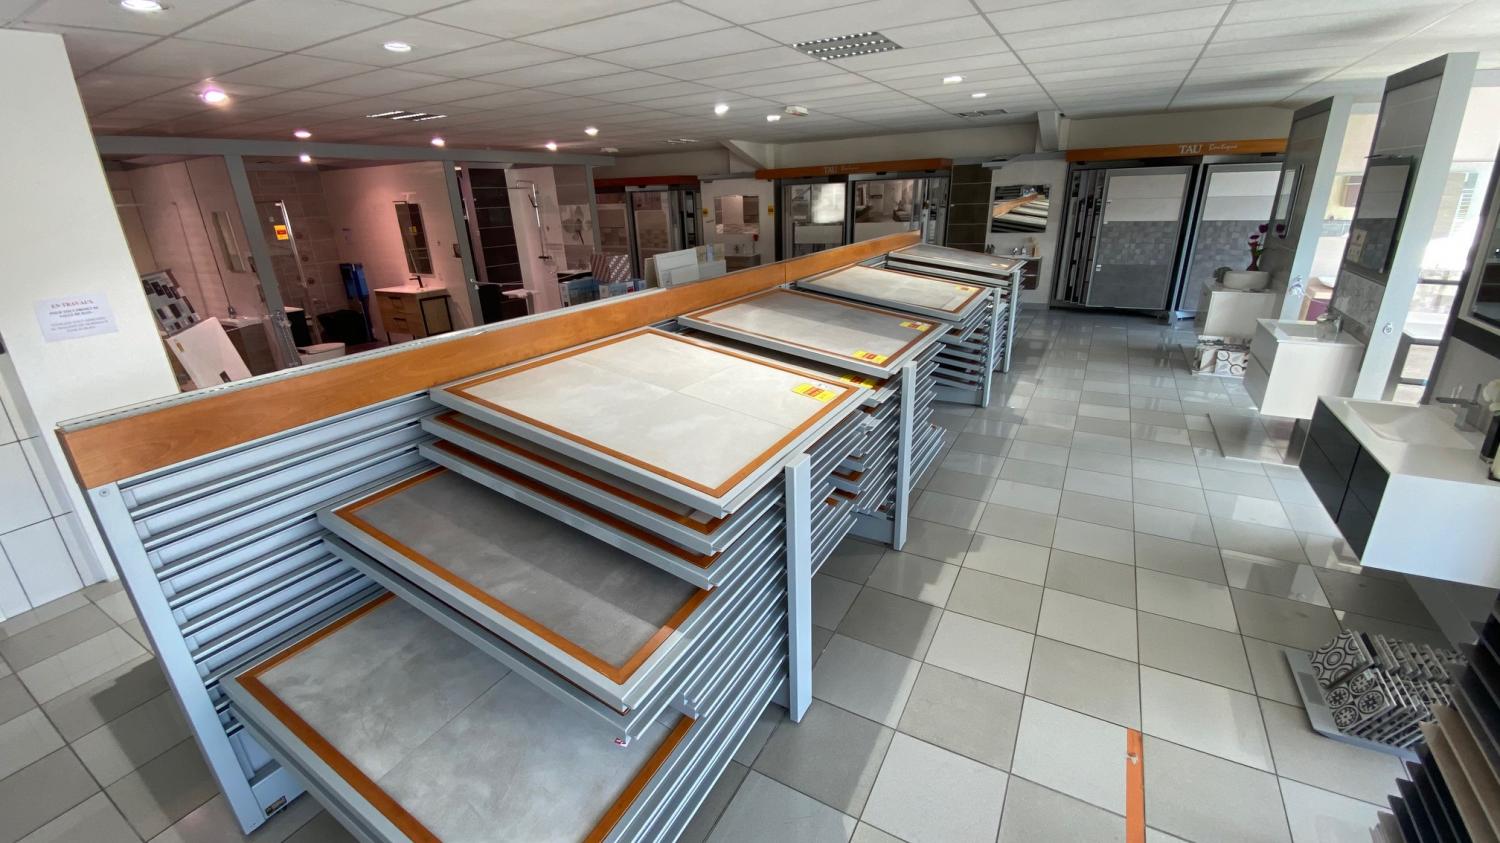 CARRELAGES STOCK -  Moselle - Forbach - Sarreguemines - Saint-Avold -